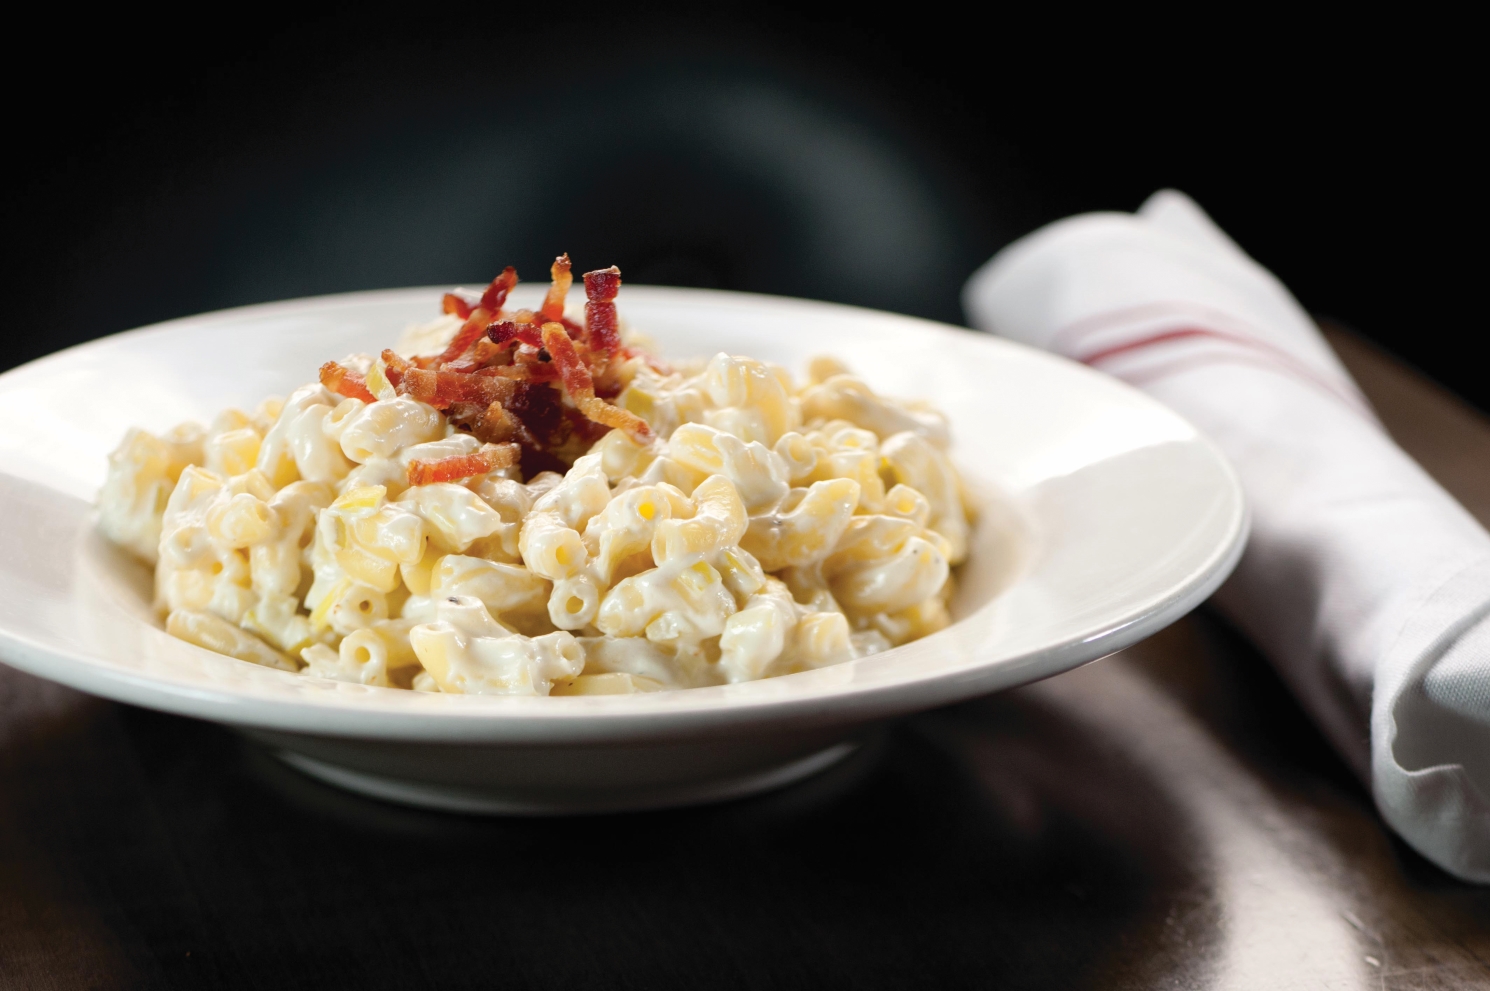 Macaroni and cheese topped with crumbled bacon